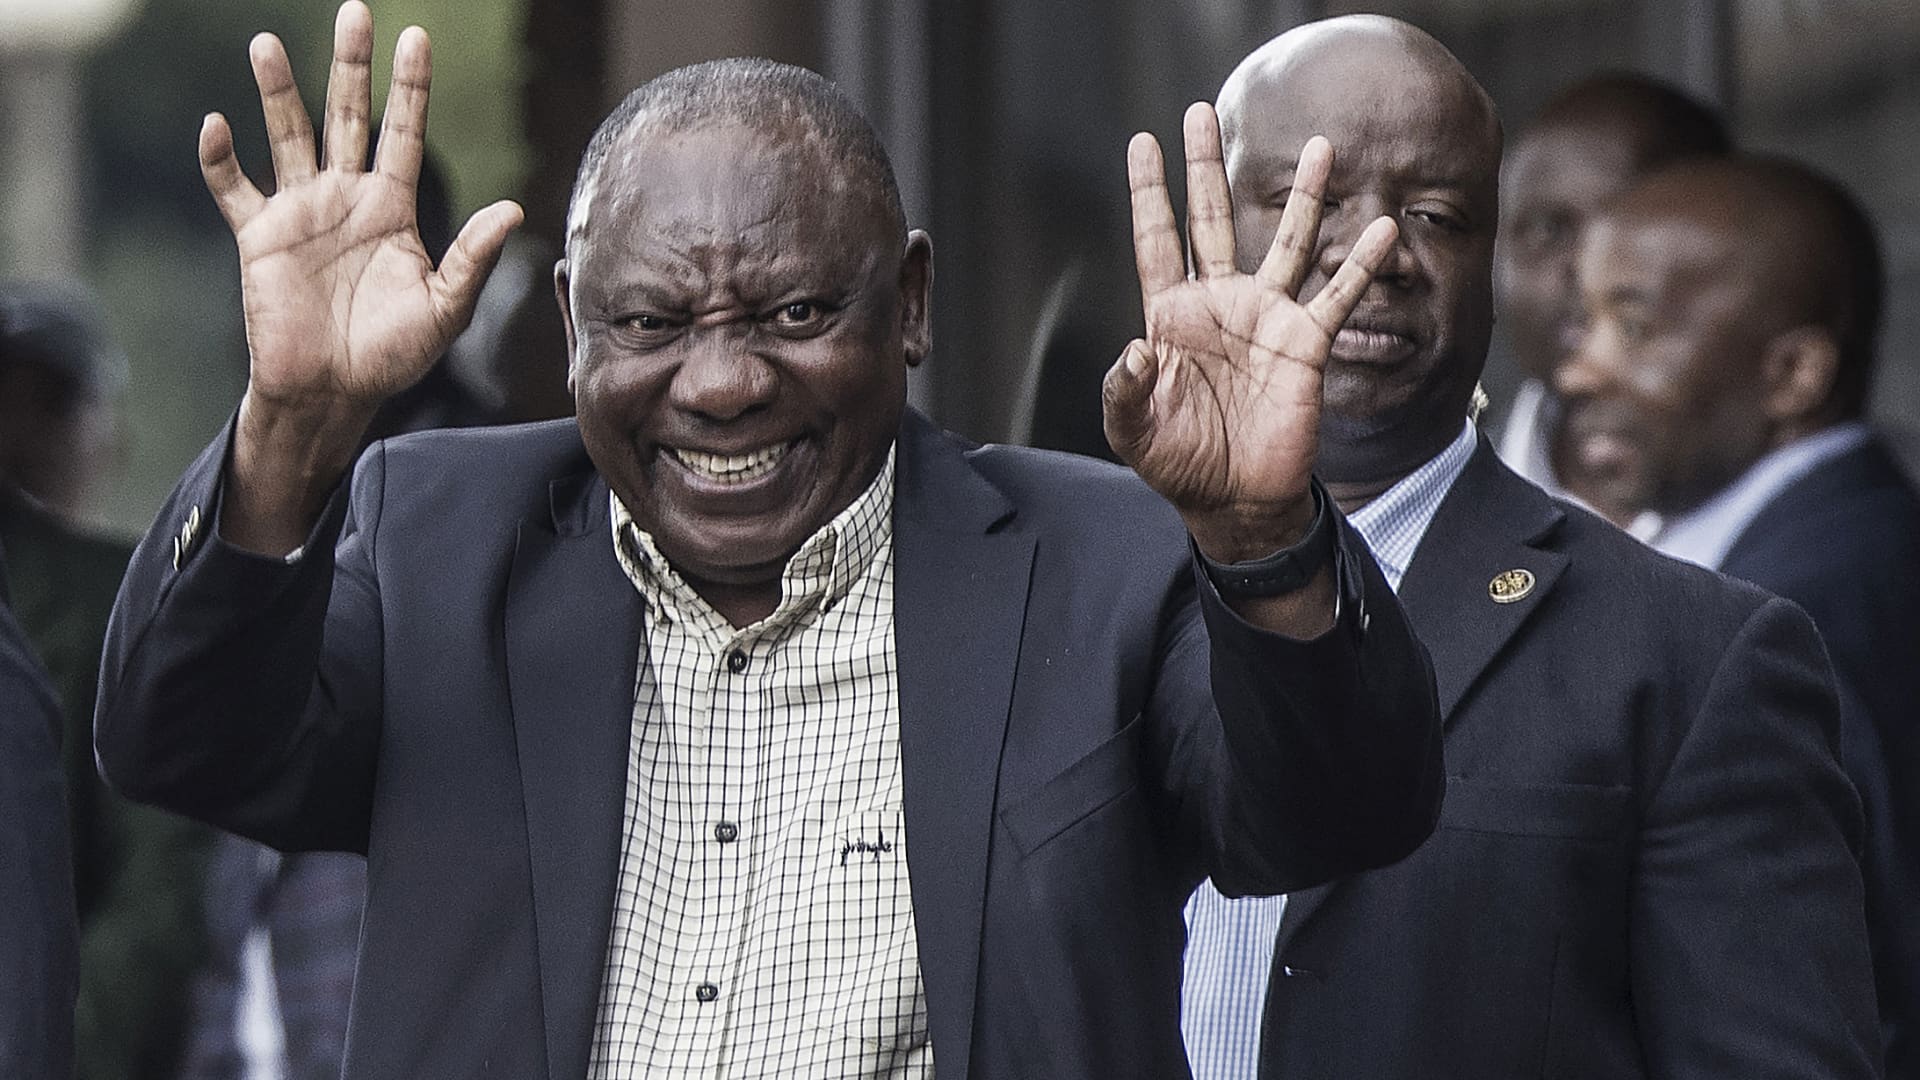 Ramaphosa re-elected as leader of South Africa’s ruling party